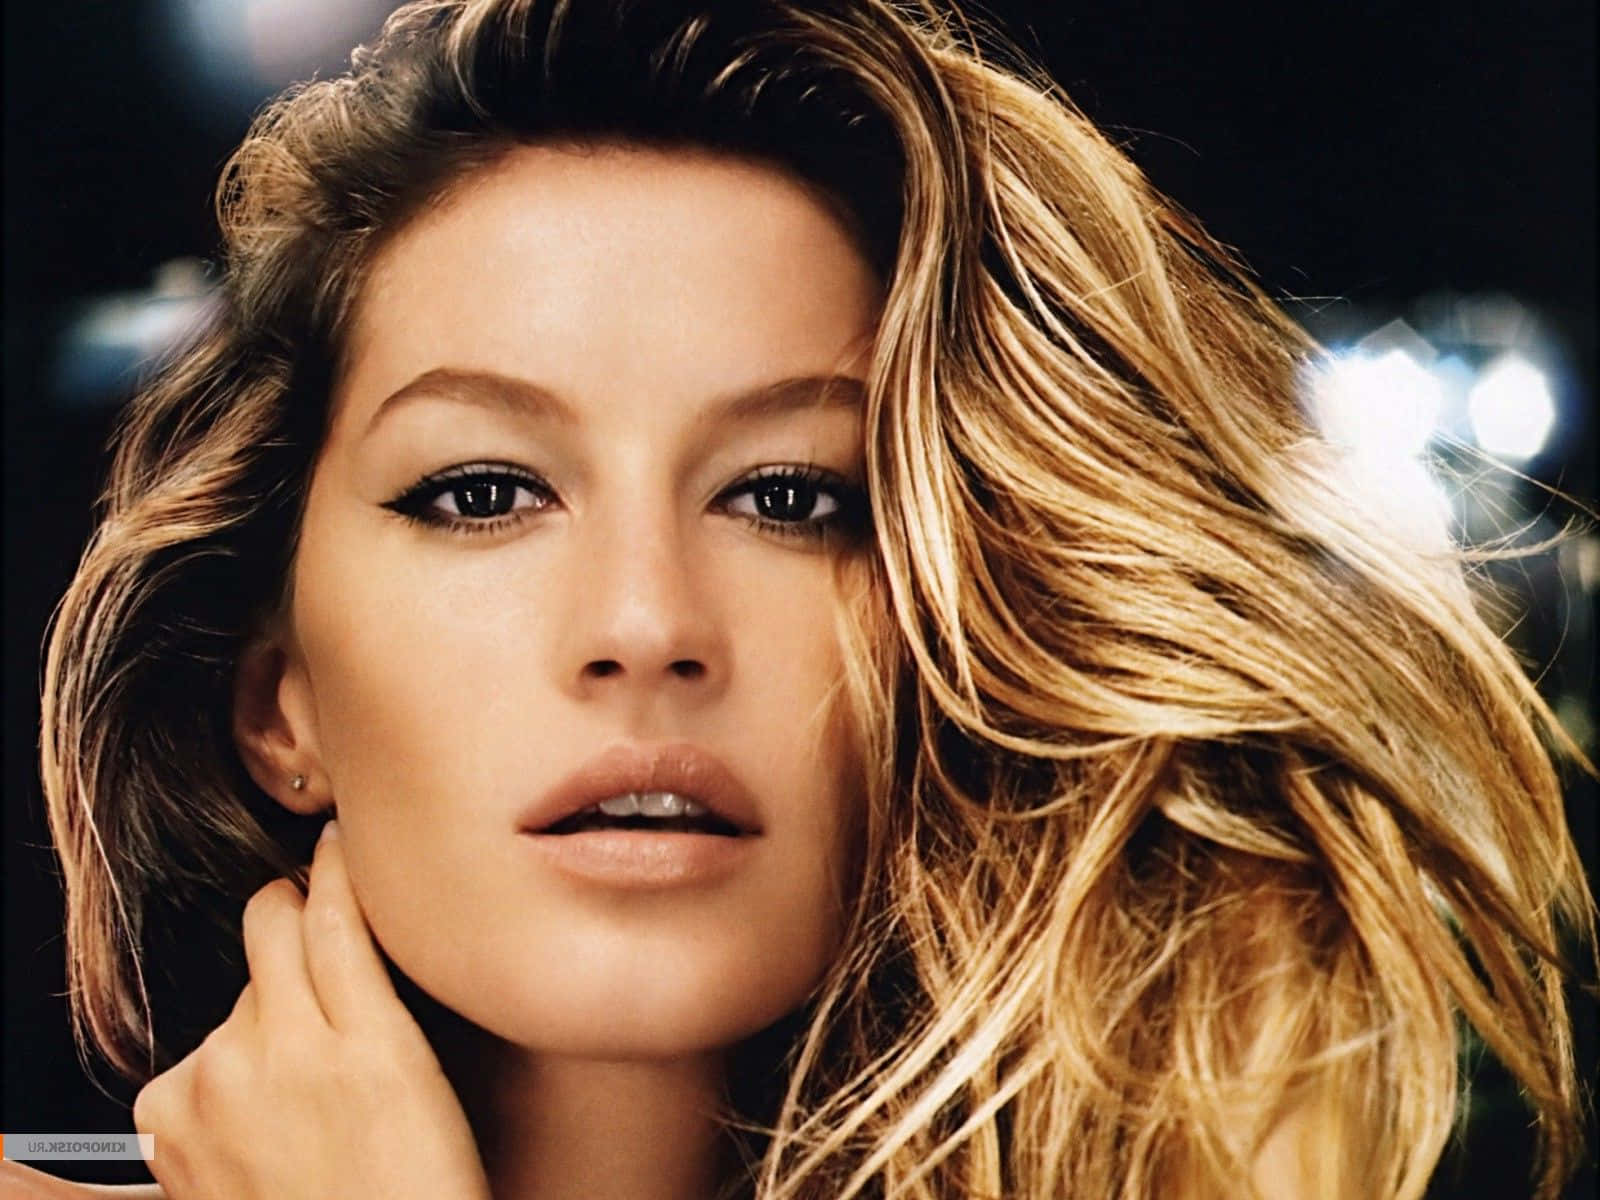 Gisele Bundchen Captivating In A Stylish Outfit Against A Neutral Background Wallpaper